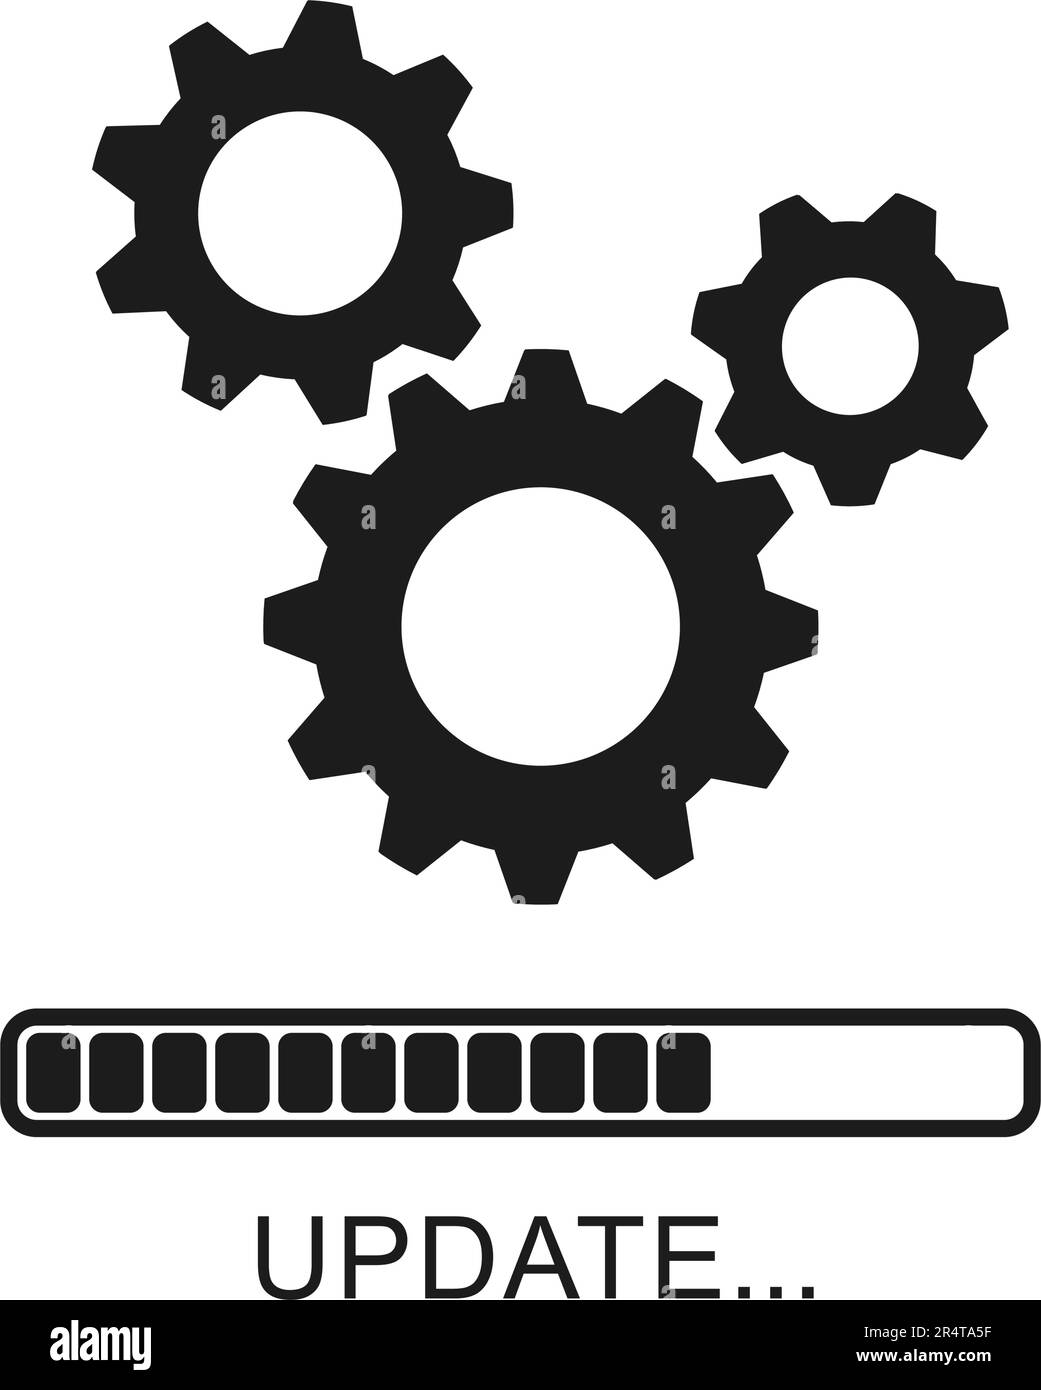 Update icon with gears. Loading or updating files, installing or updating new software etc. Modern flat design. Vector illustration. Isolated Stock Vector